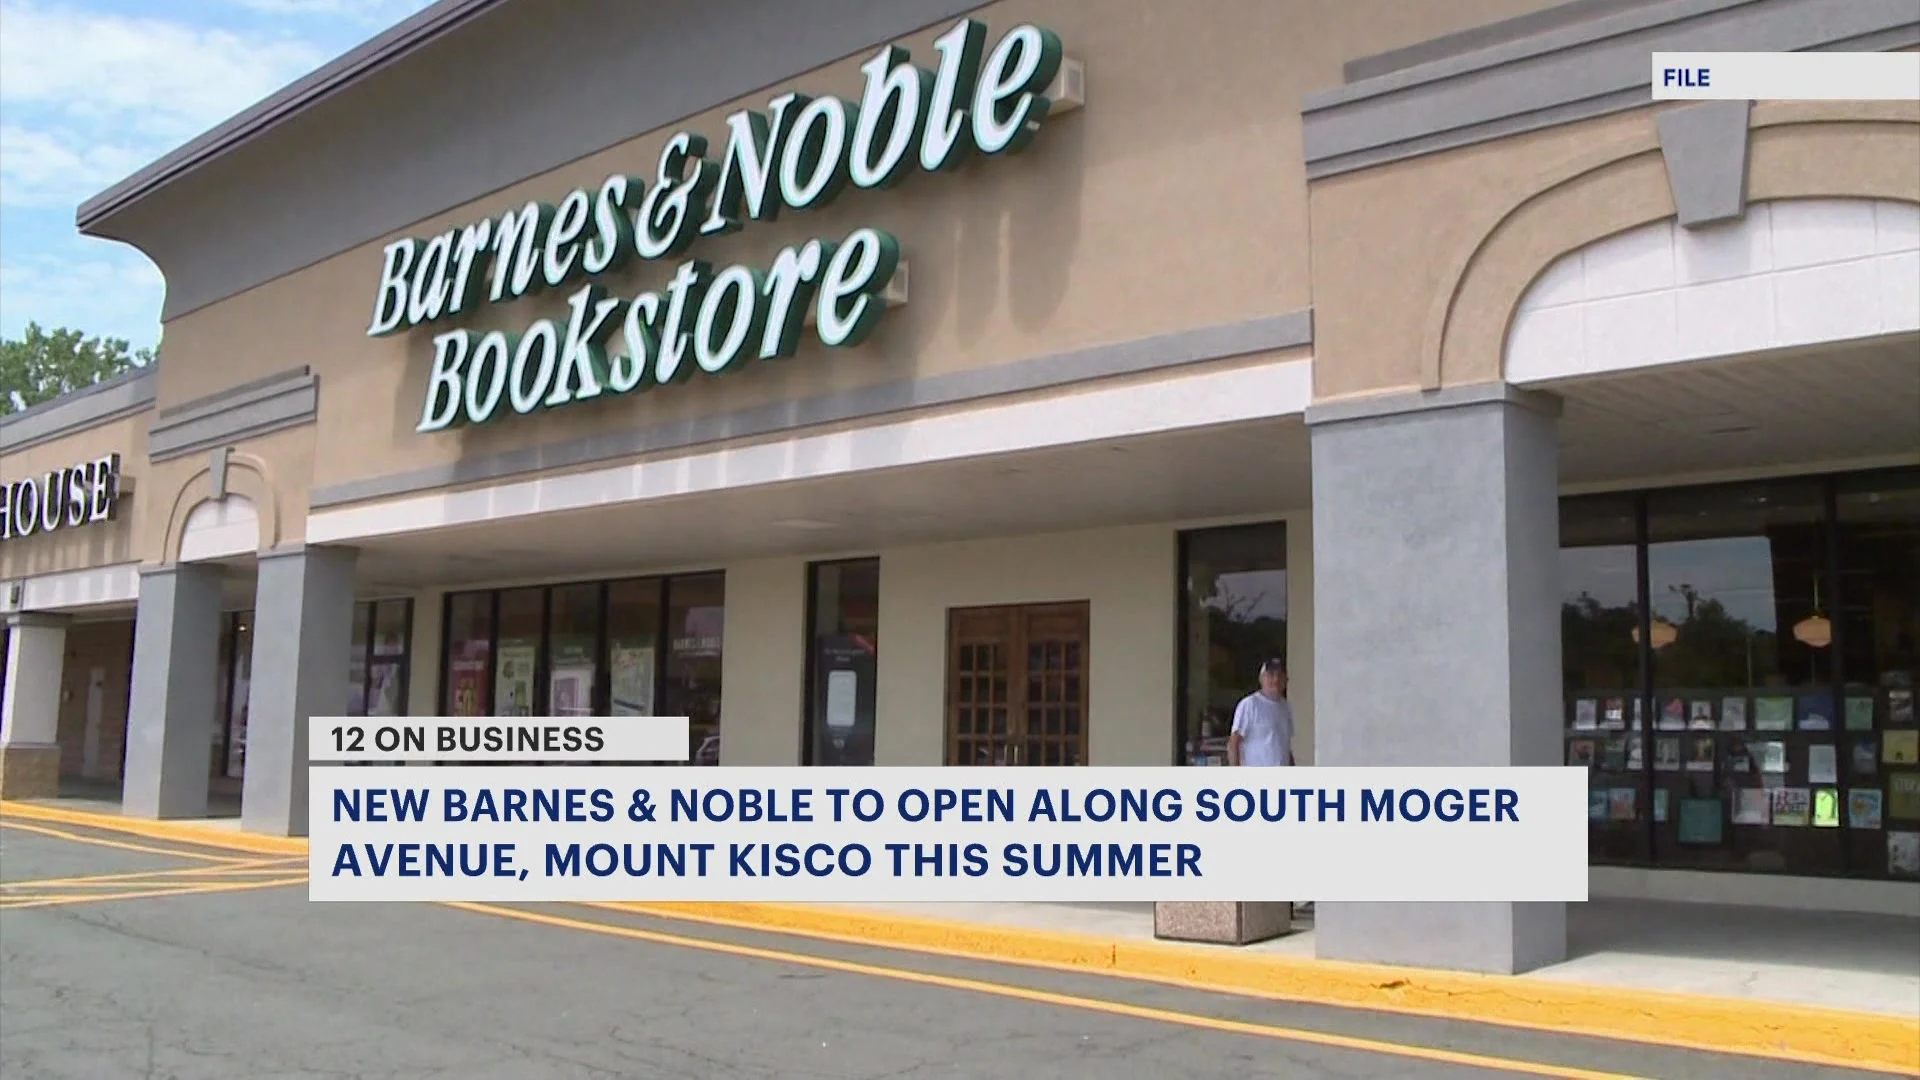 New Barnes & Noble coming to Mount Kisco this summer